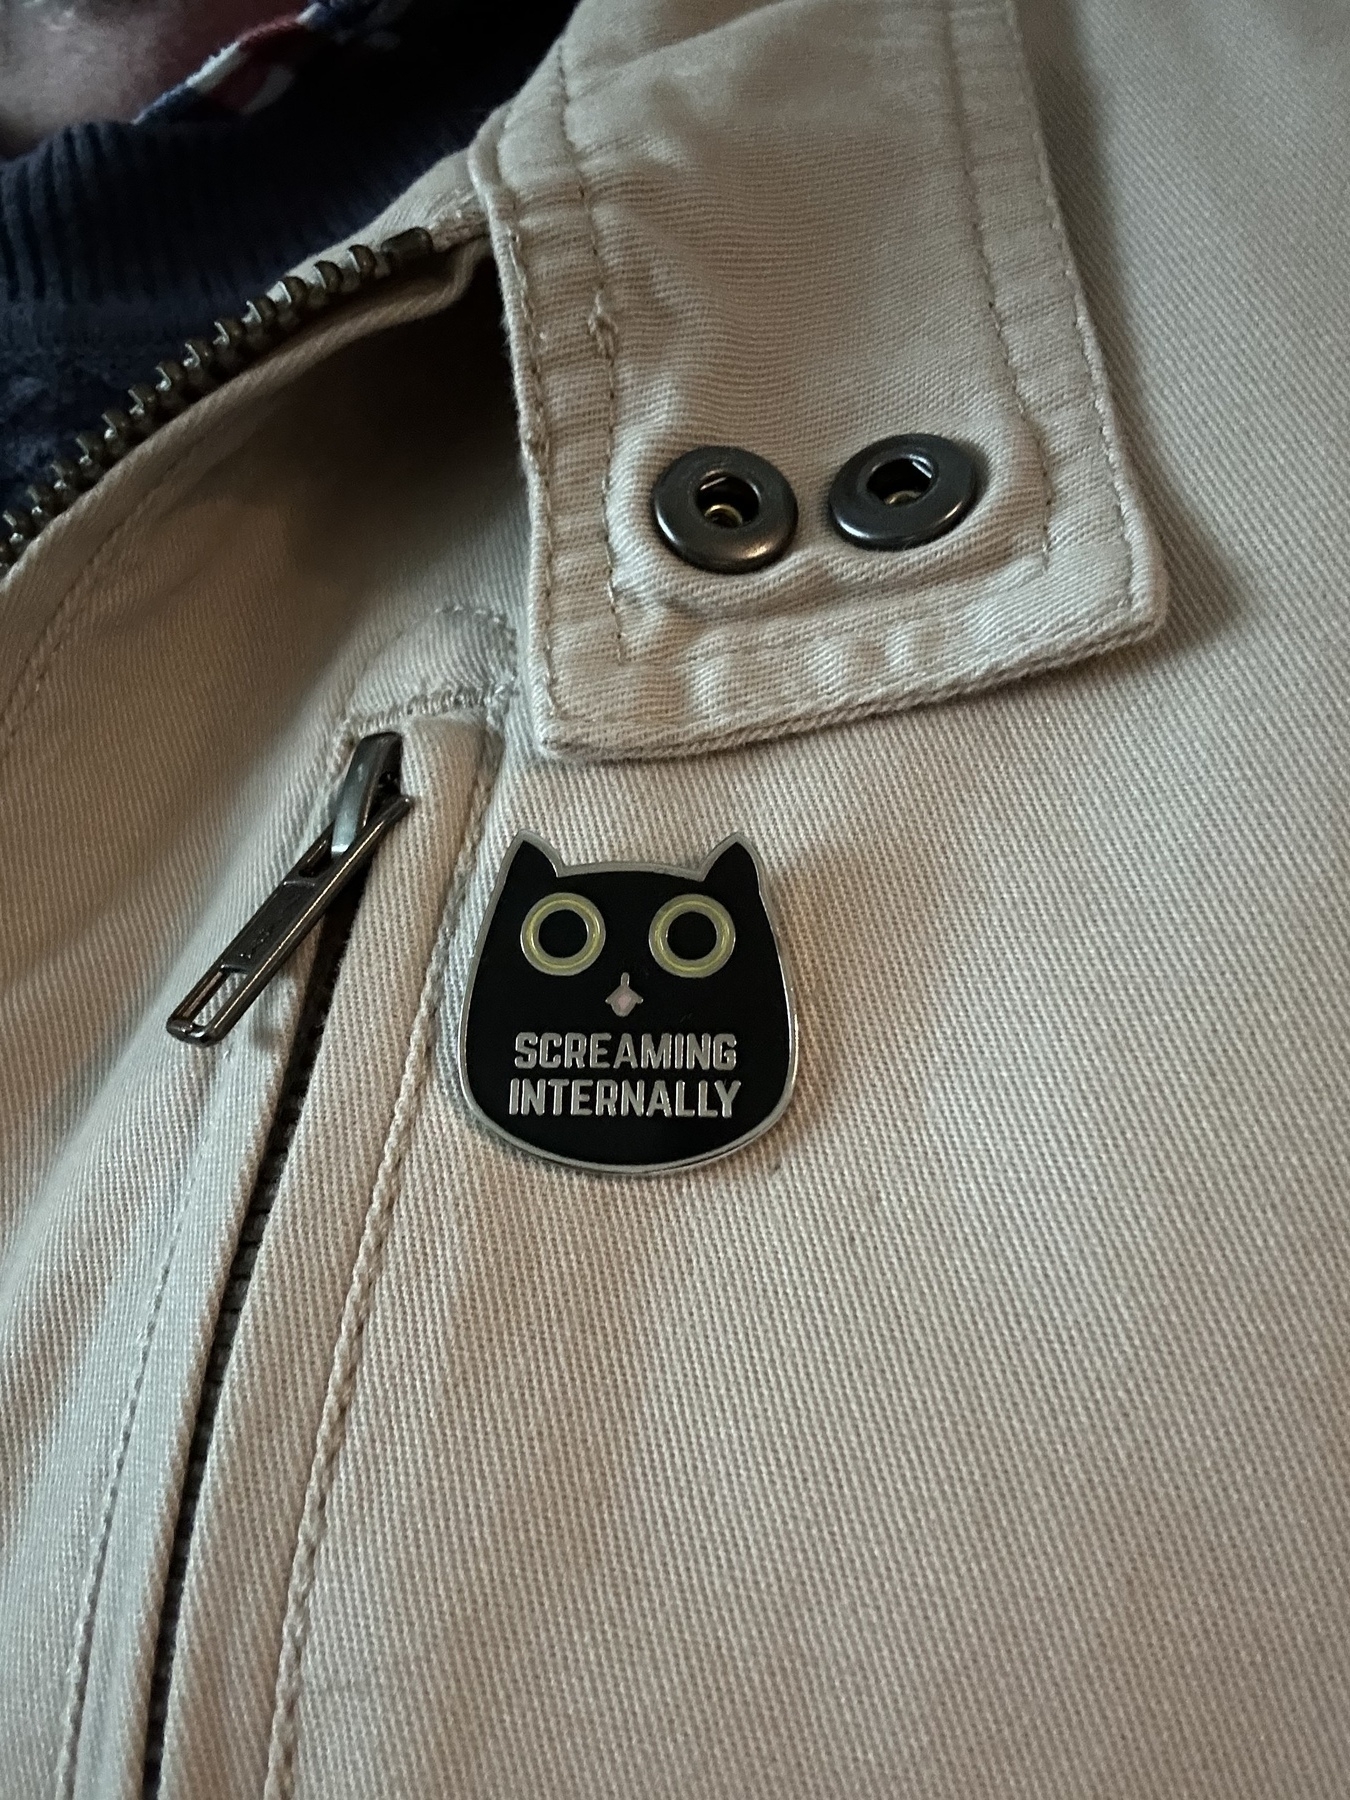 A black enamel badge in the shape of an animal head, pointy ears, big round eyes and the words “Screaming Internally” where the mouth would be. It’s pinned on a cream coloured jacket.